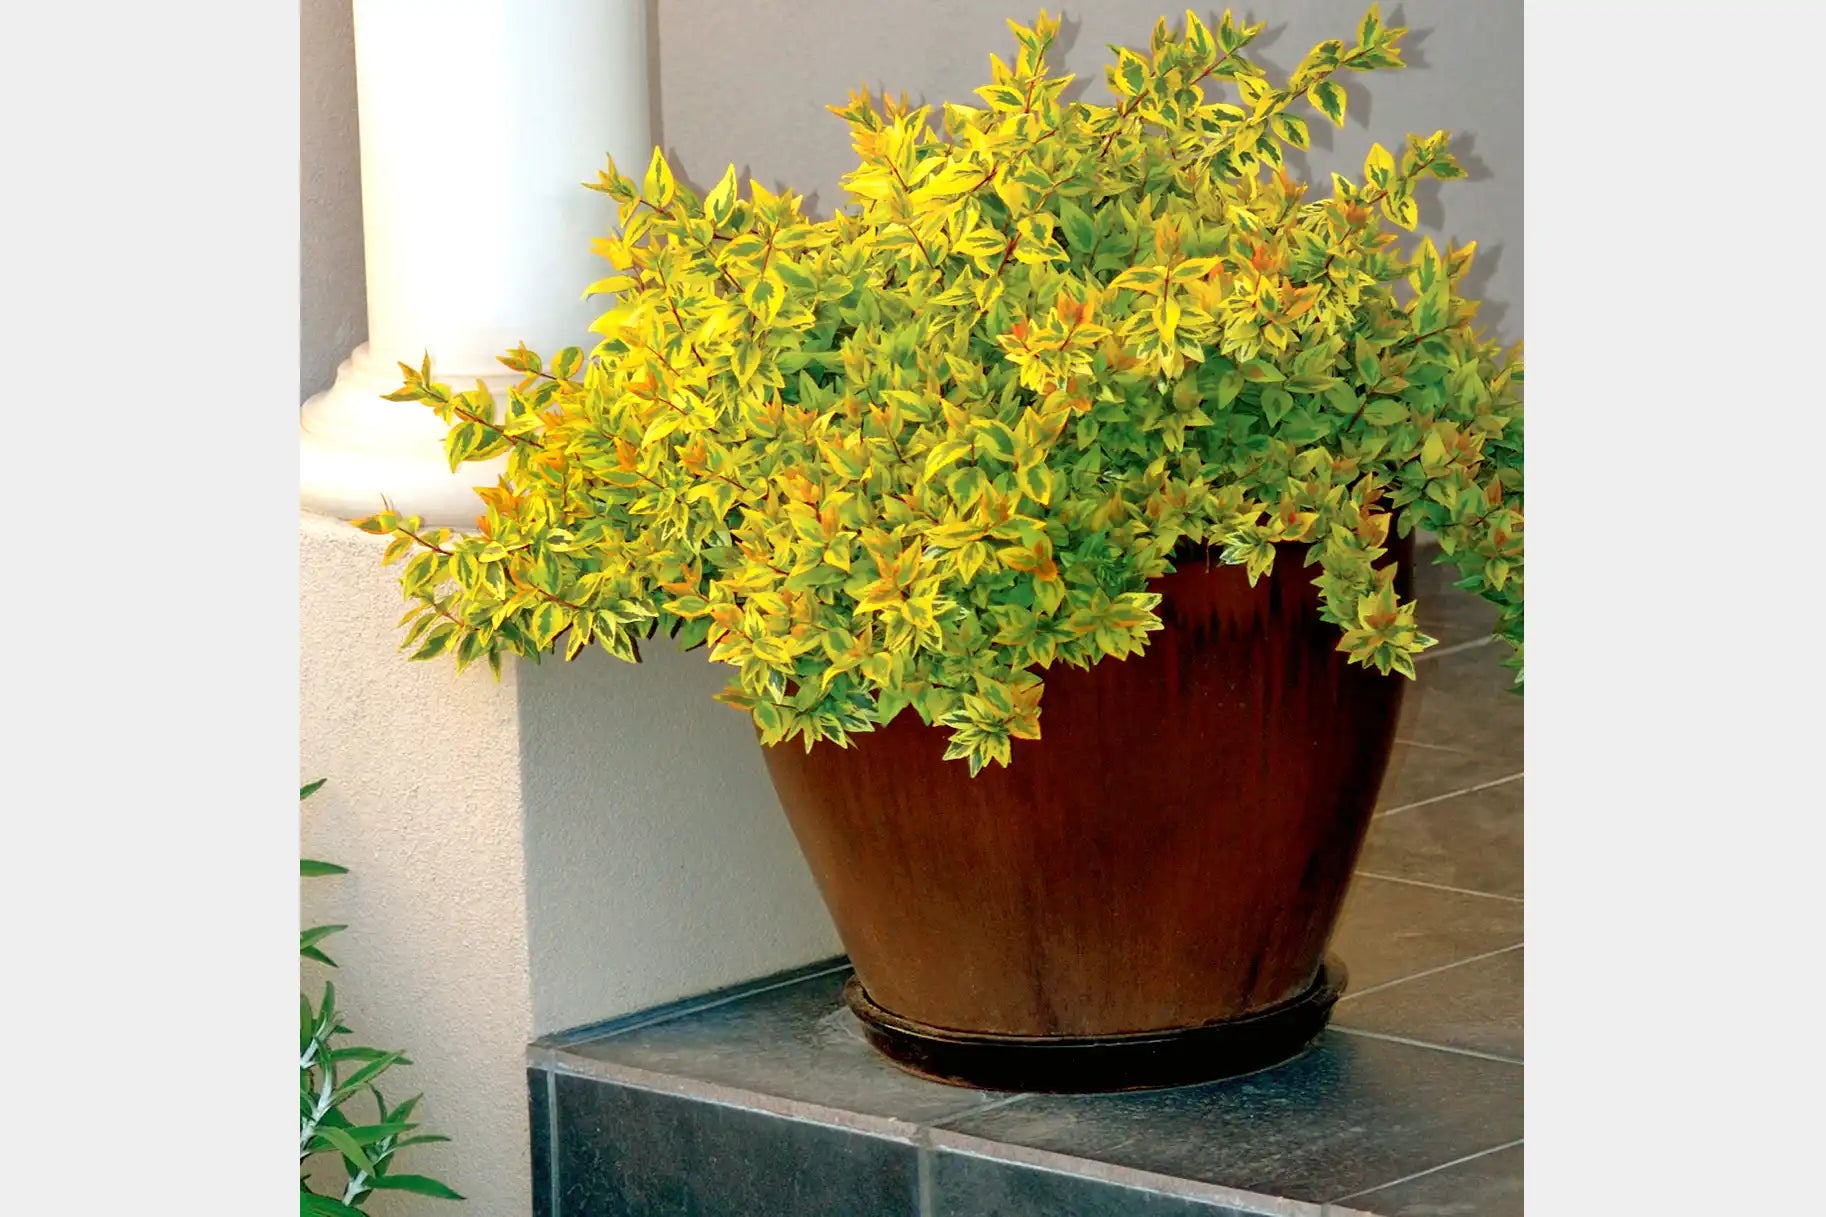 Kaleidoscople Abelia is placed in an rustic brown entryway pot, ready to welcome visitors with its array of green, yellow and red abelia foliage. 